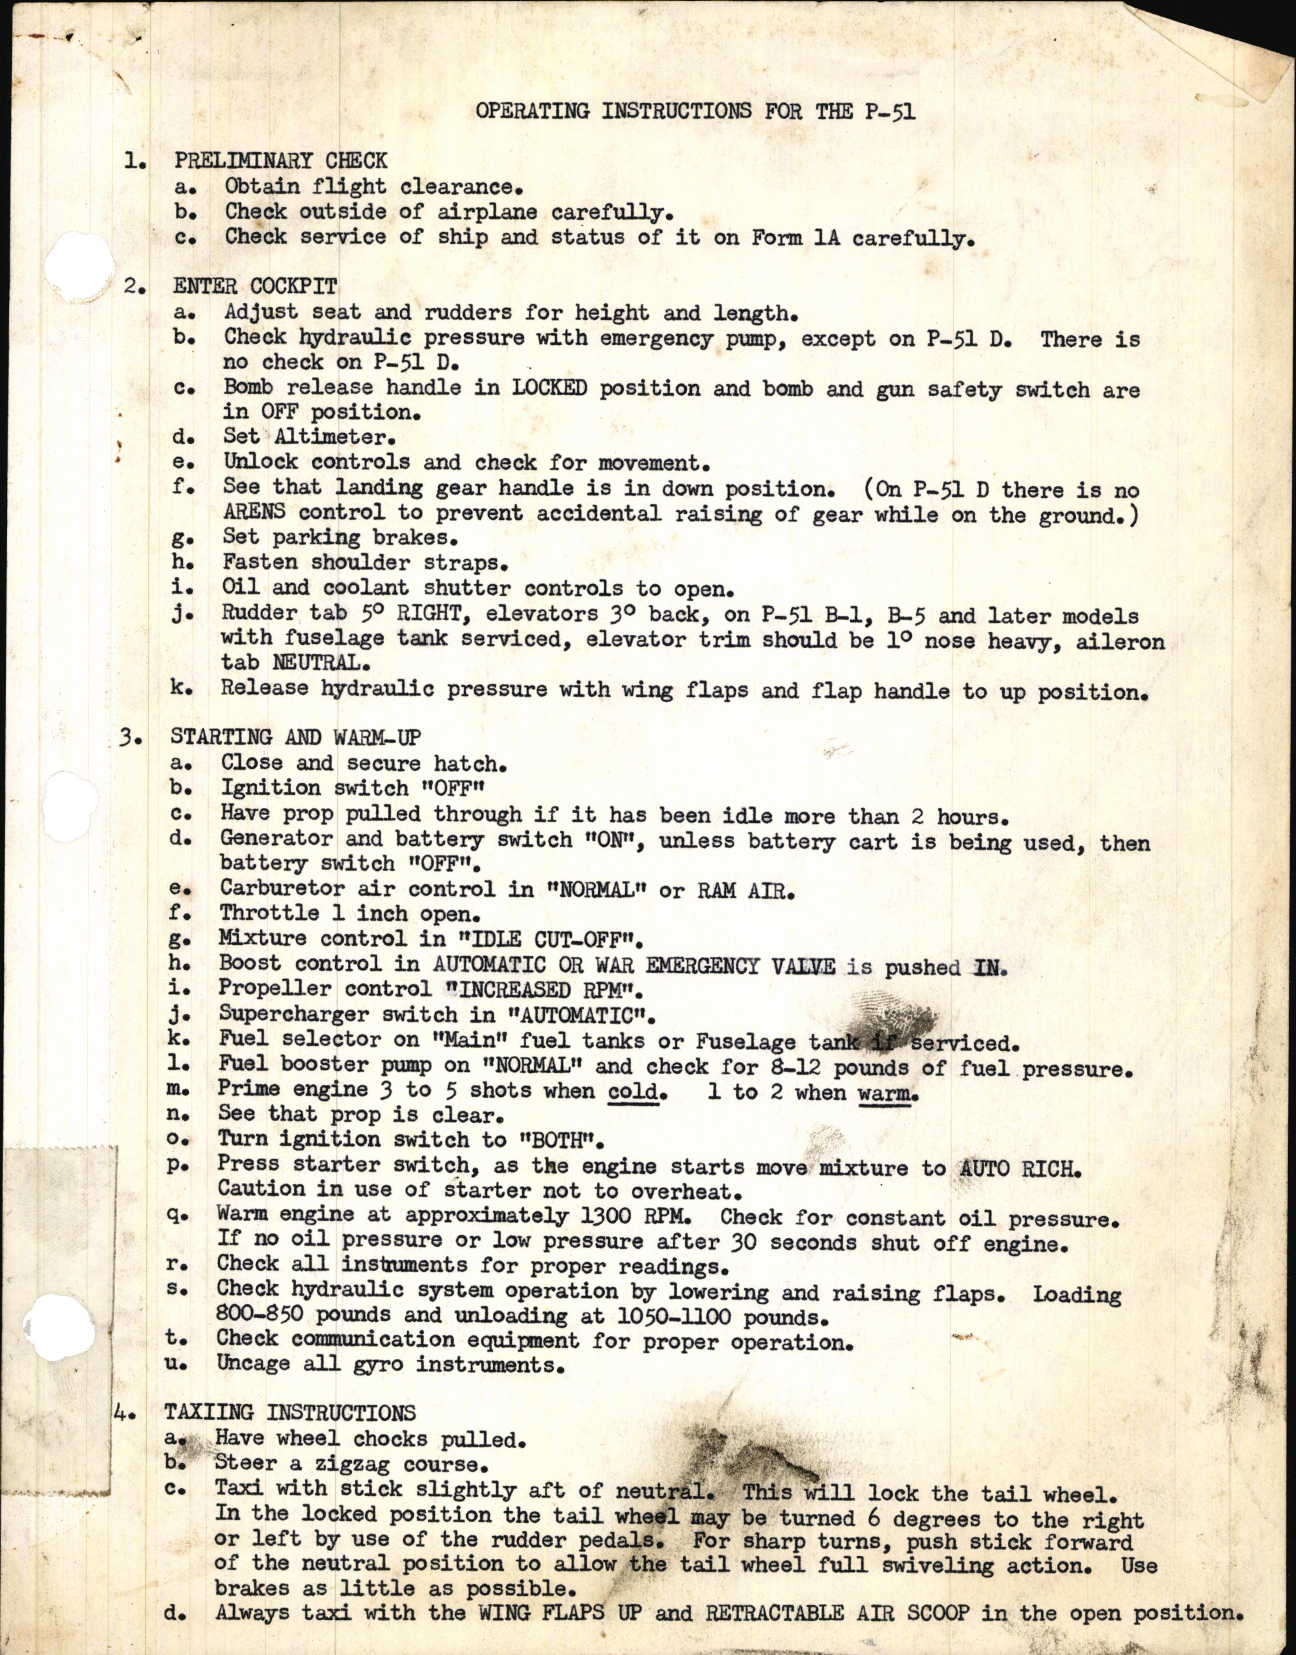 Sample page 1 from AirCorps Library document: Operating Instructions for the P-51